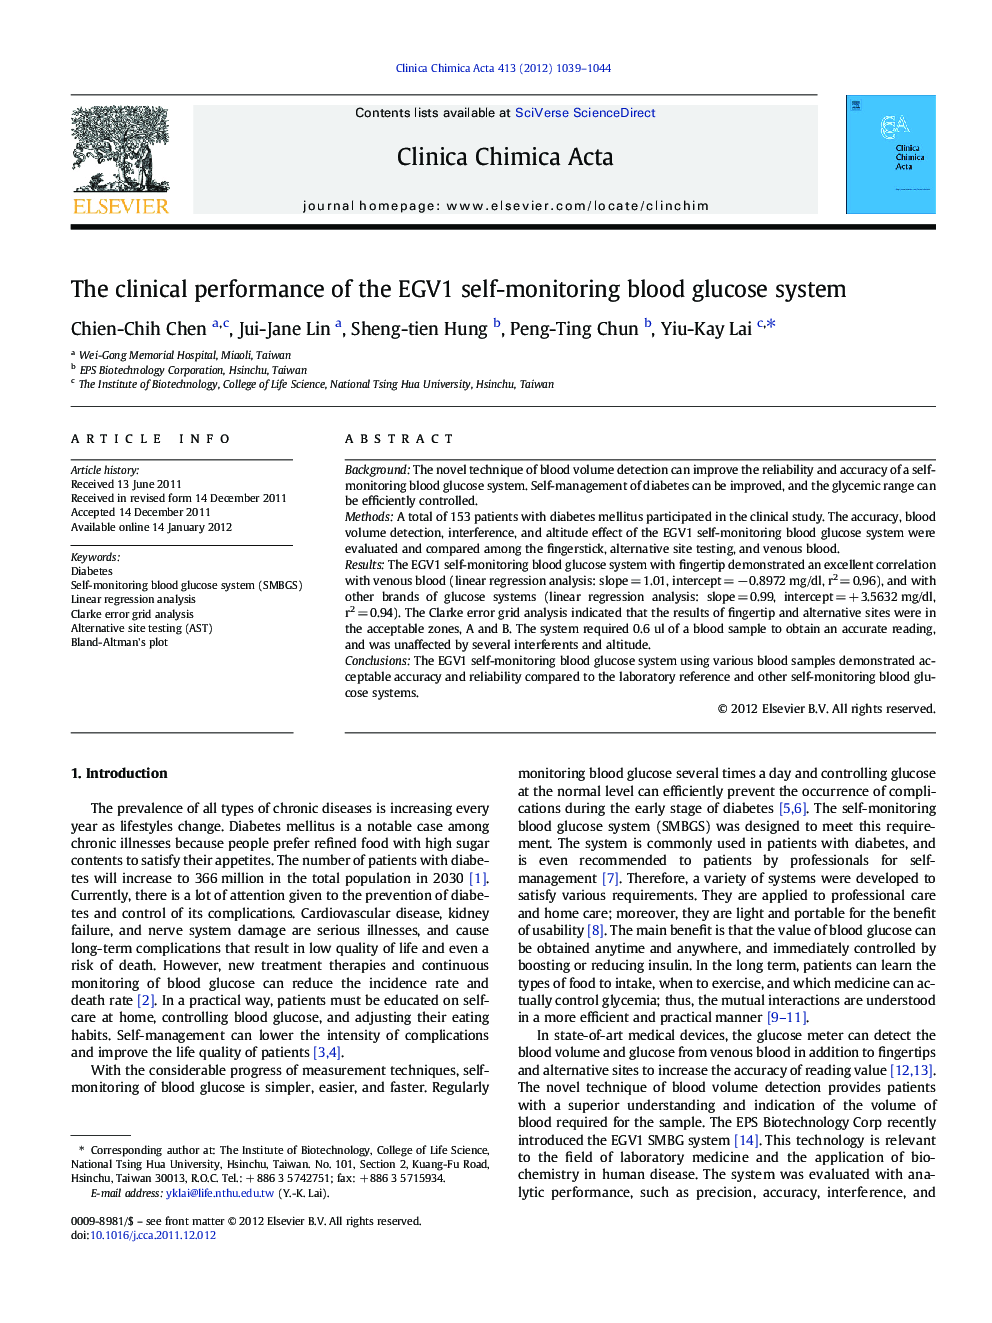 The clinical performance of the EGV1 self-monitoring blood glucose system